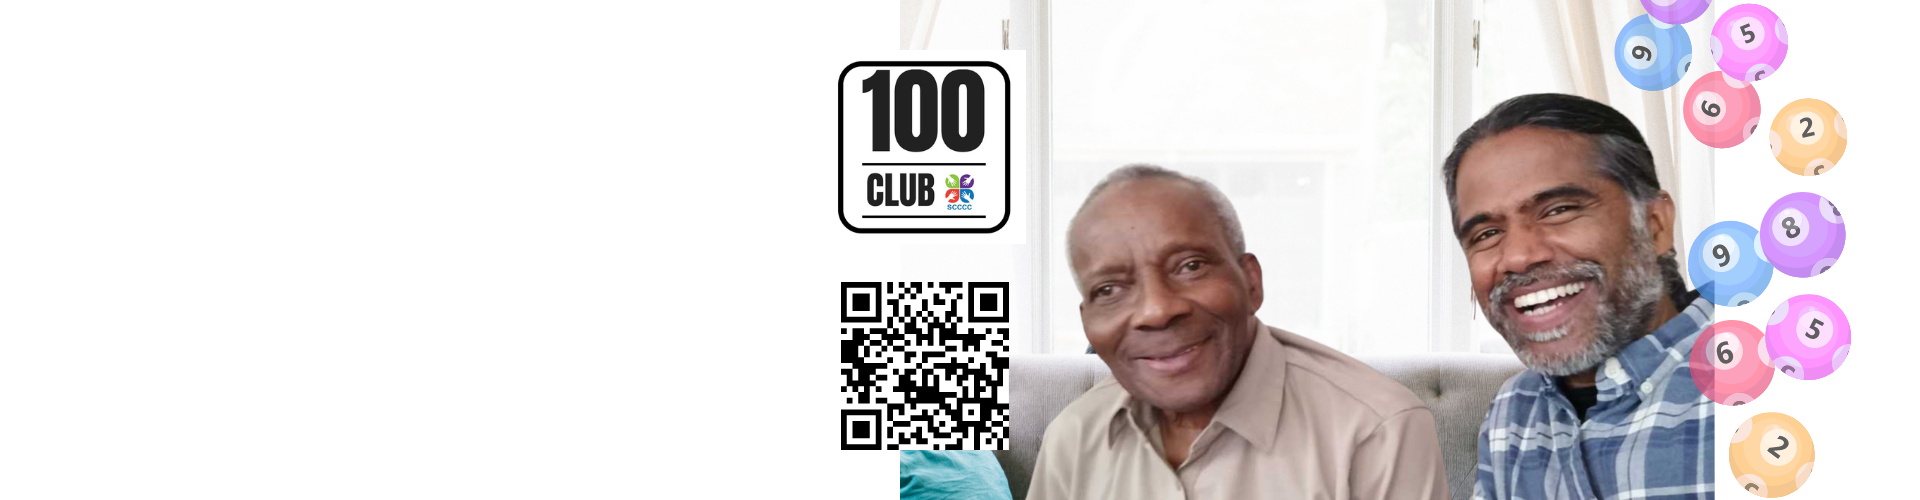 Join our 100 Club 